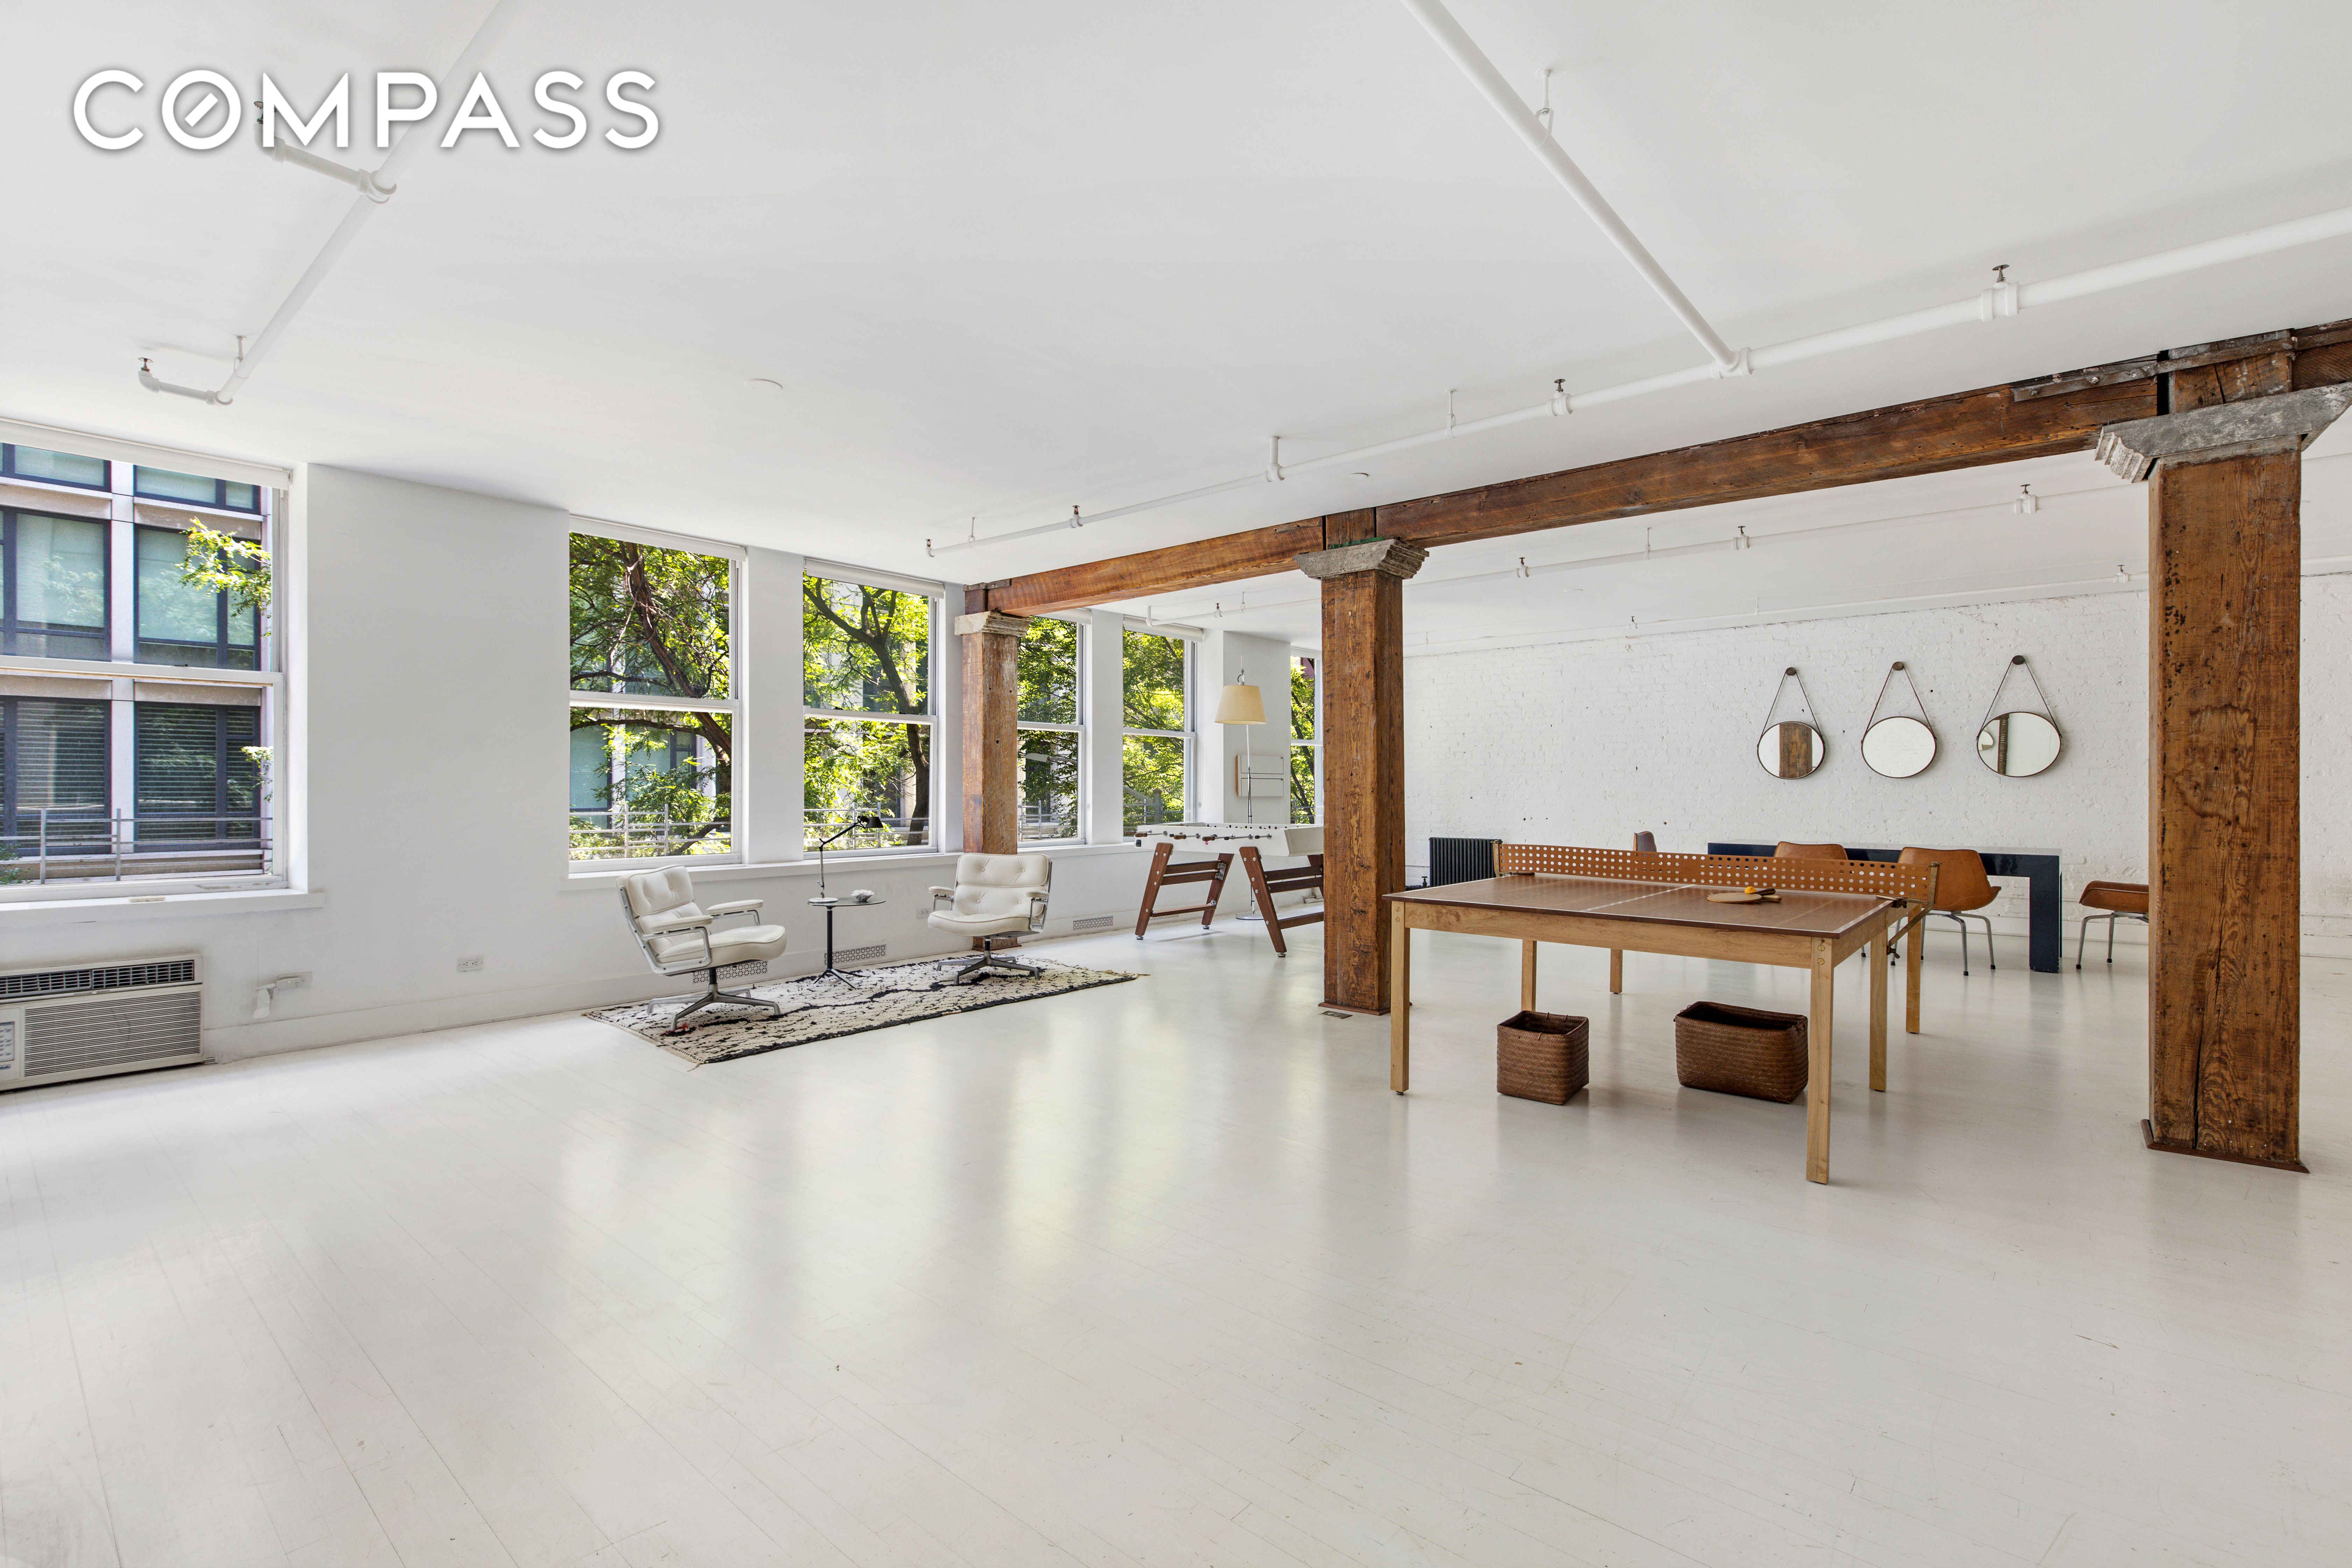 136 West 22nd Street 3, Chelsea, Downtown, NYC - 3 Bedrooms  
2.5 Bathrooms  
7 Rooms - 